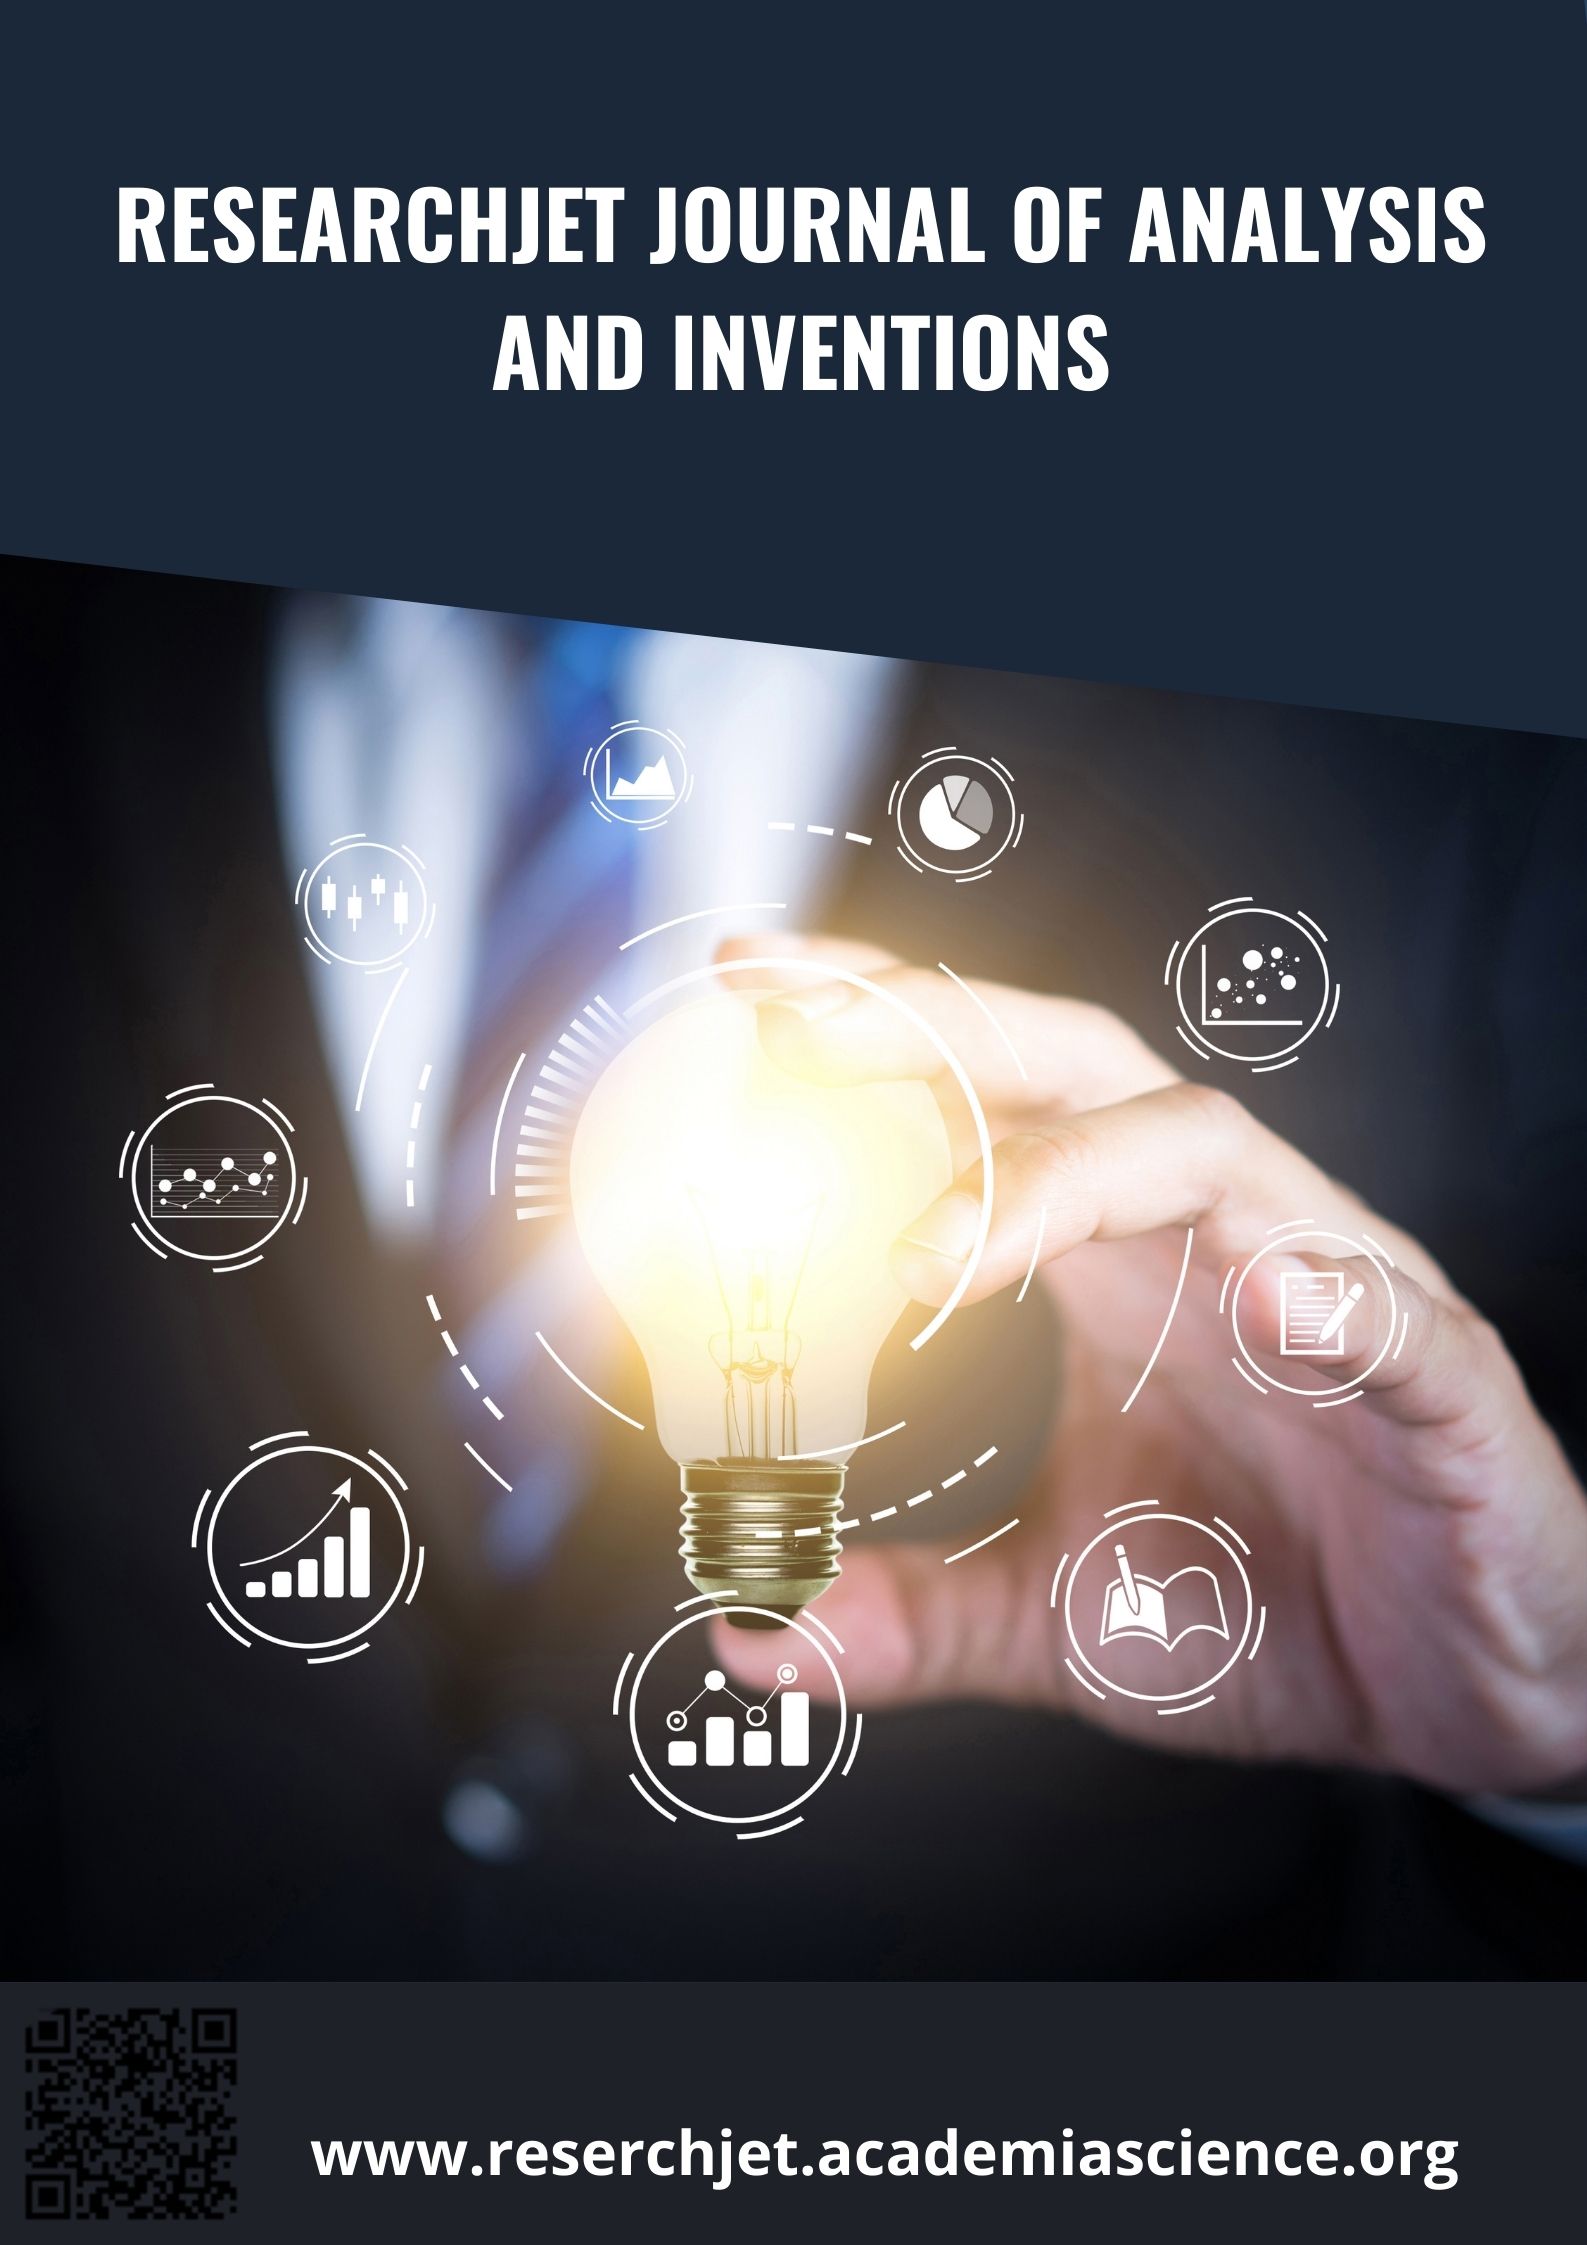 ResearchJet Journal of Analysis and Inventions (RJAI)